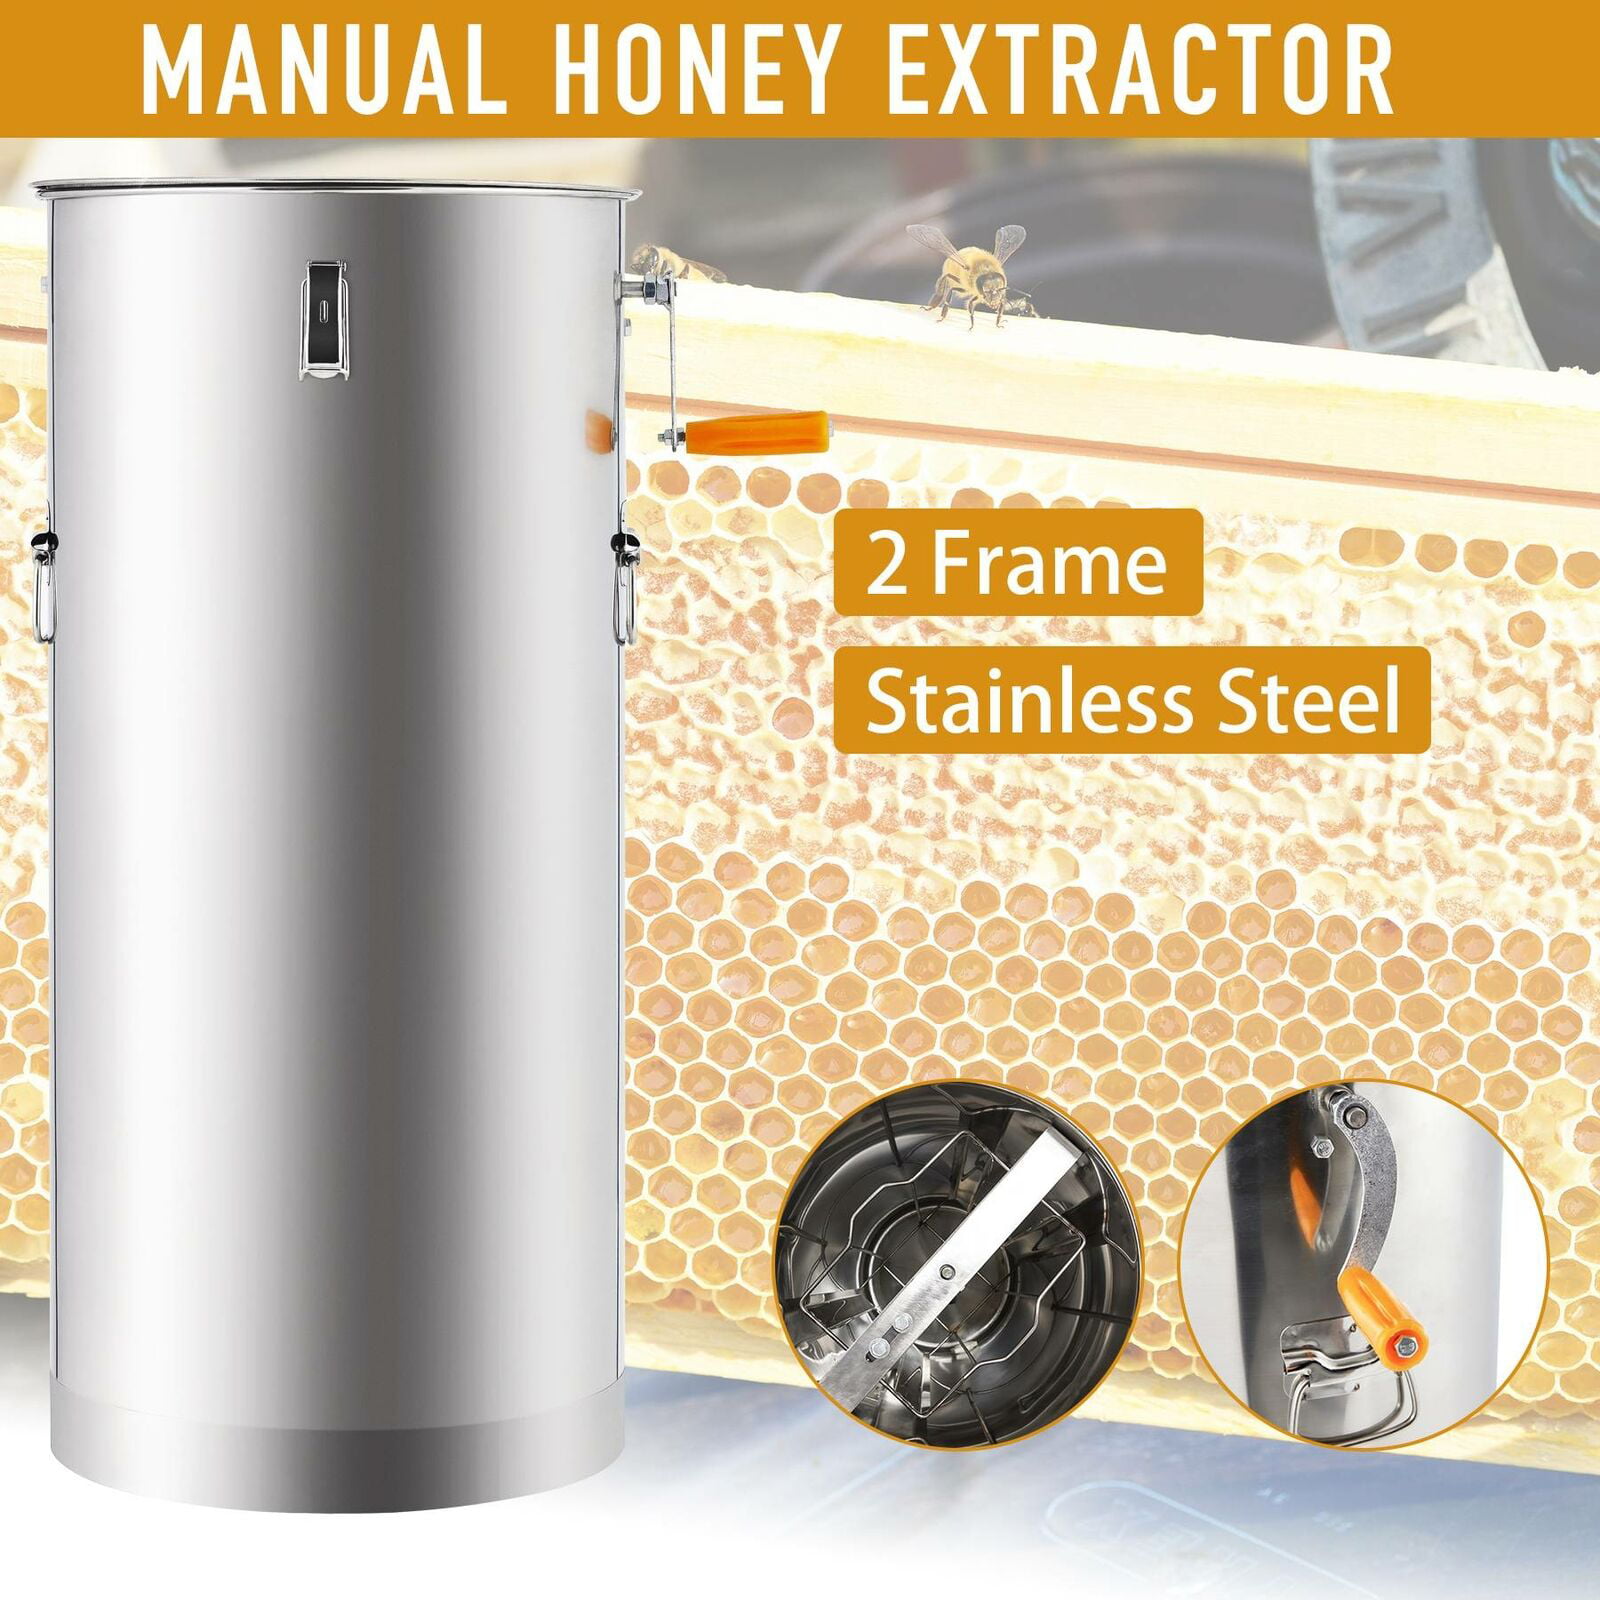 Details about   Manual Bee Honey Extractor Stainless Steel Tank 2Frame Beekeeping Bee Hive Equip 